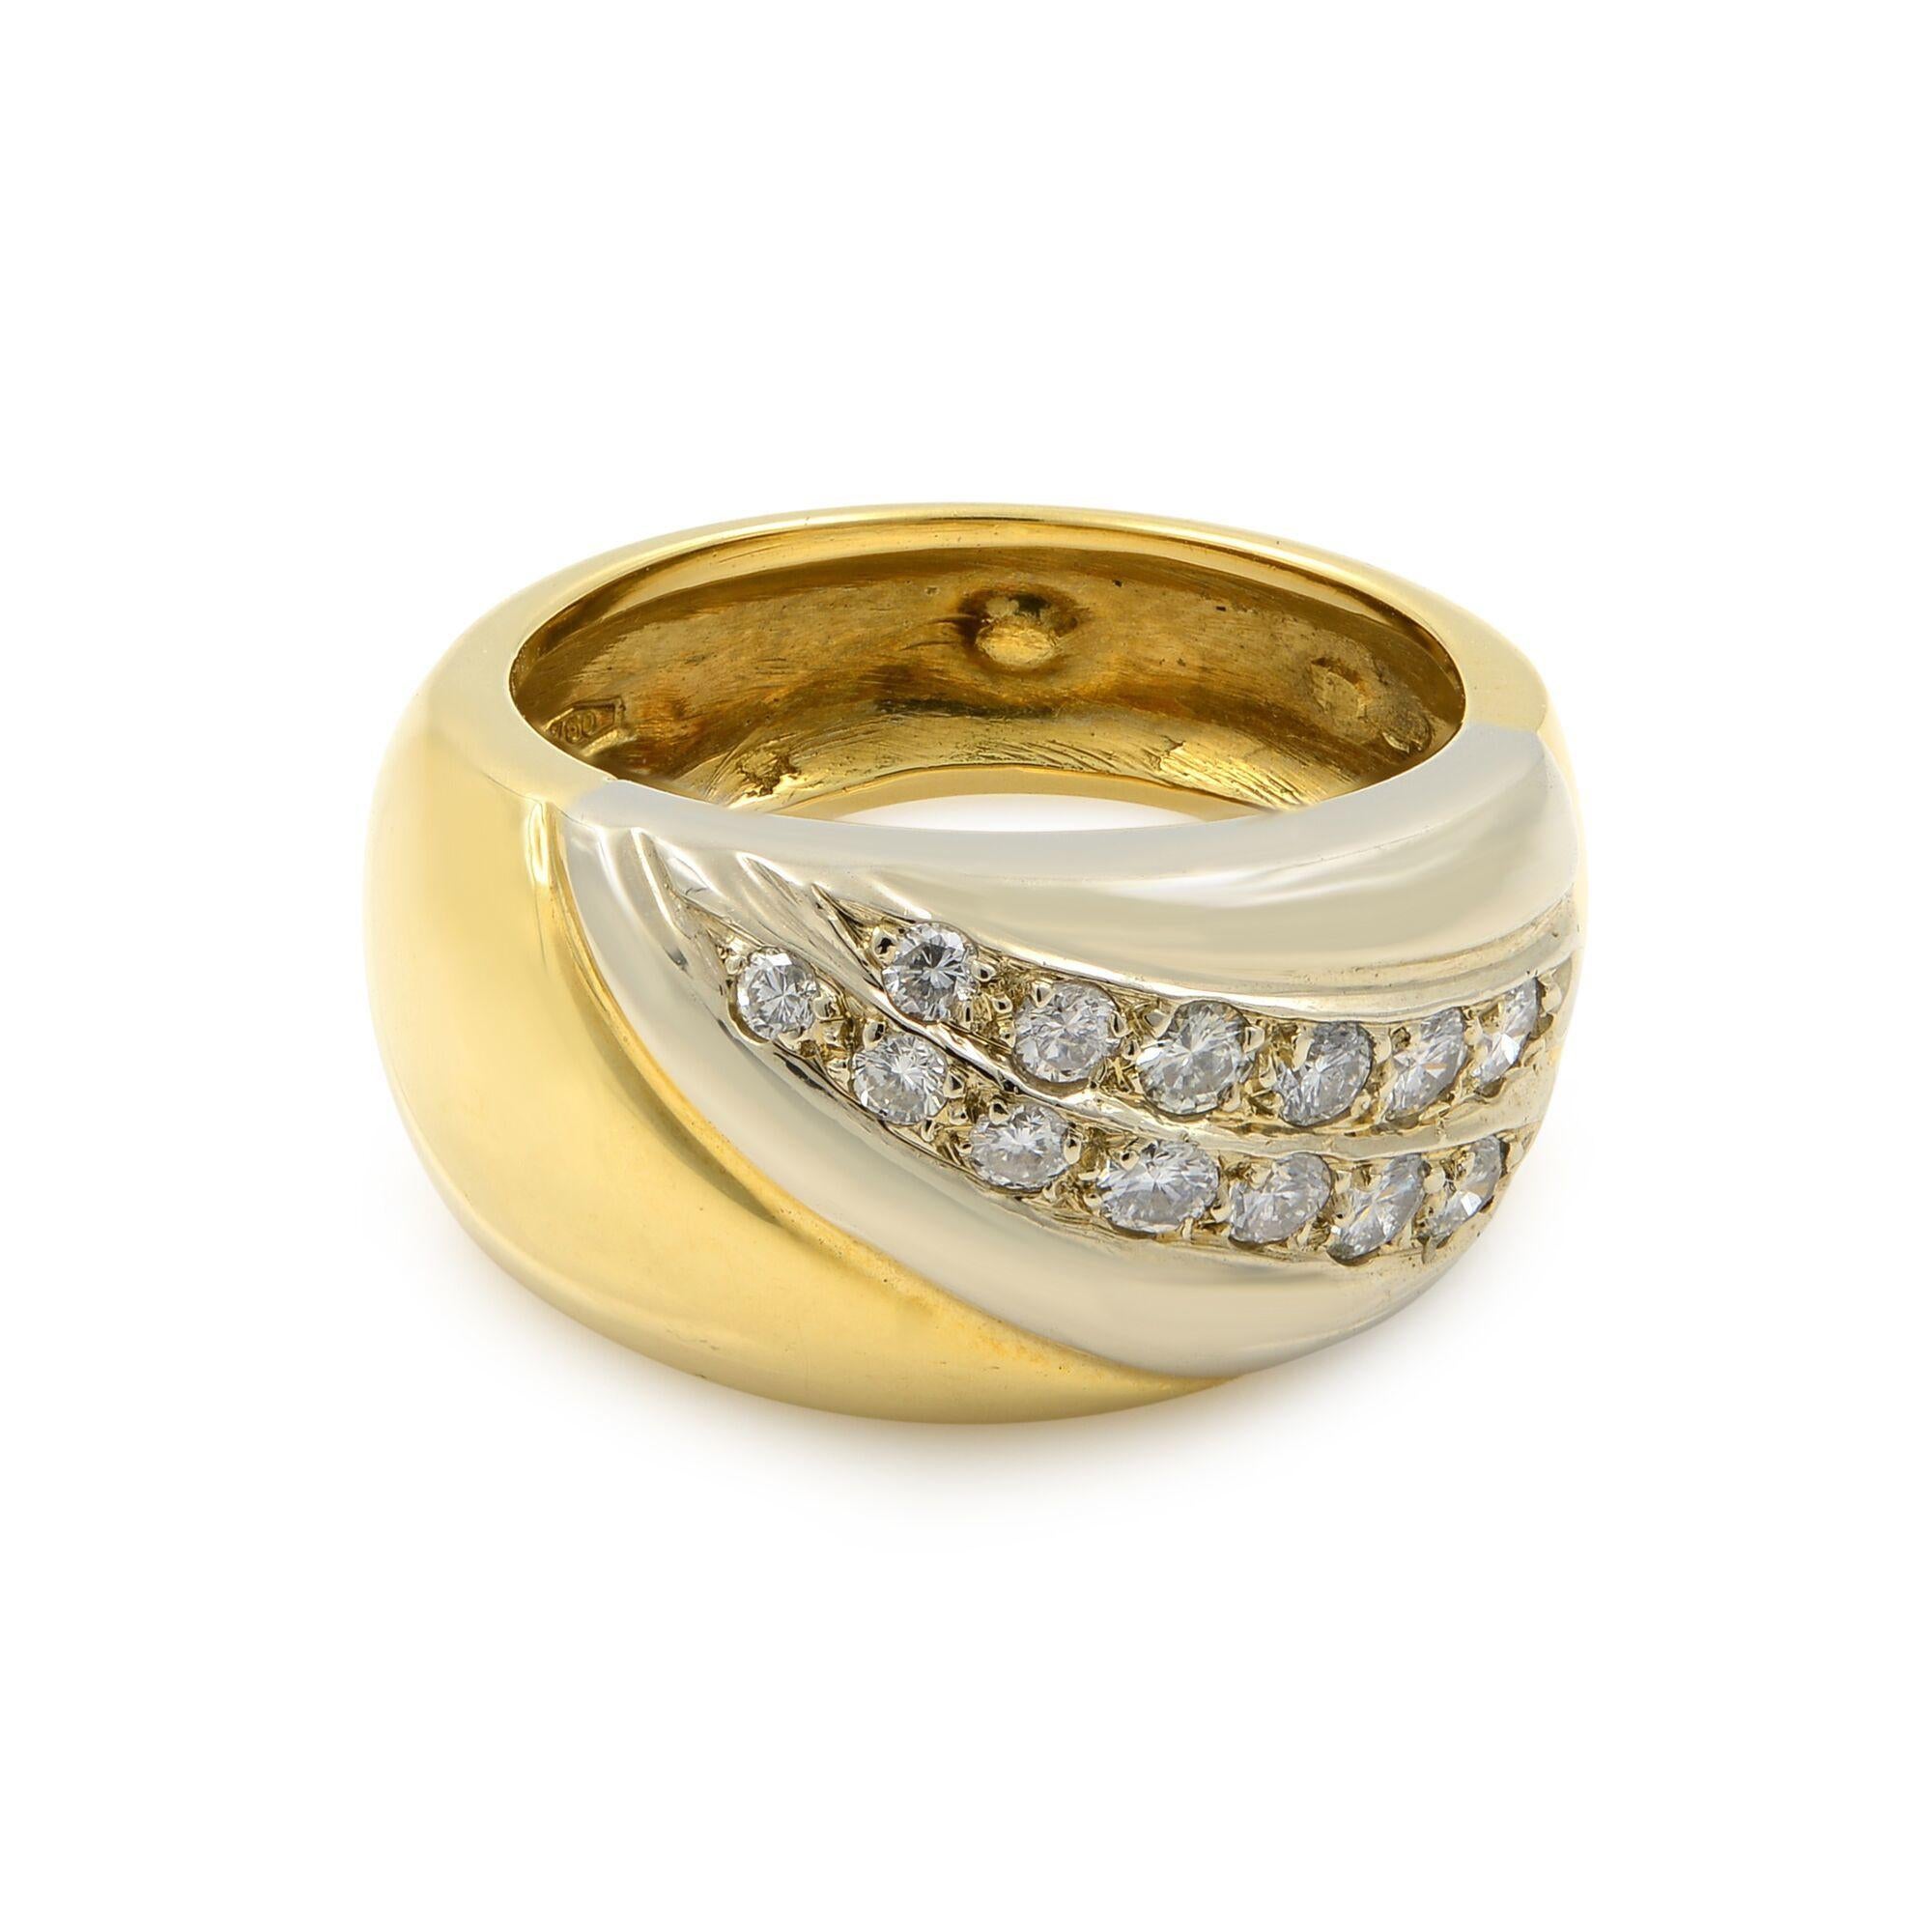 Our wide diamond band in 18K gold is made in two-tone gold. It is an appealing mix of smooth yellow gold and high polished white gold that has been encrusted with round brilliant cut diamonds. Diamonds are almost wrapping around the band creating a